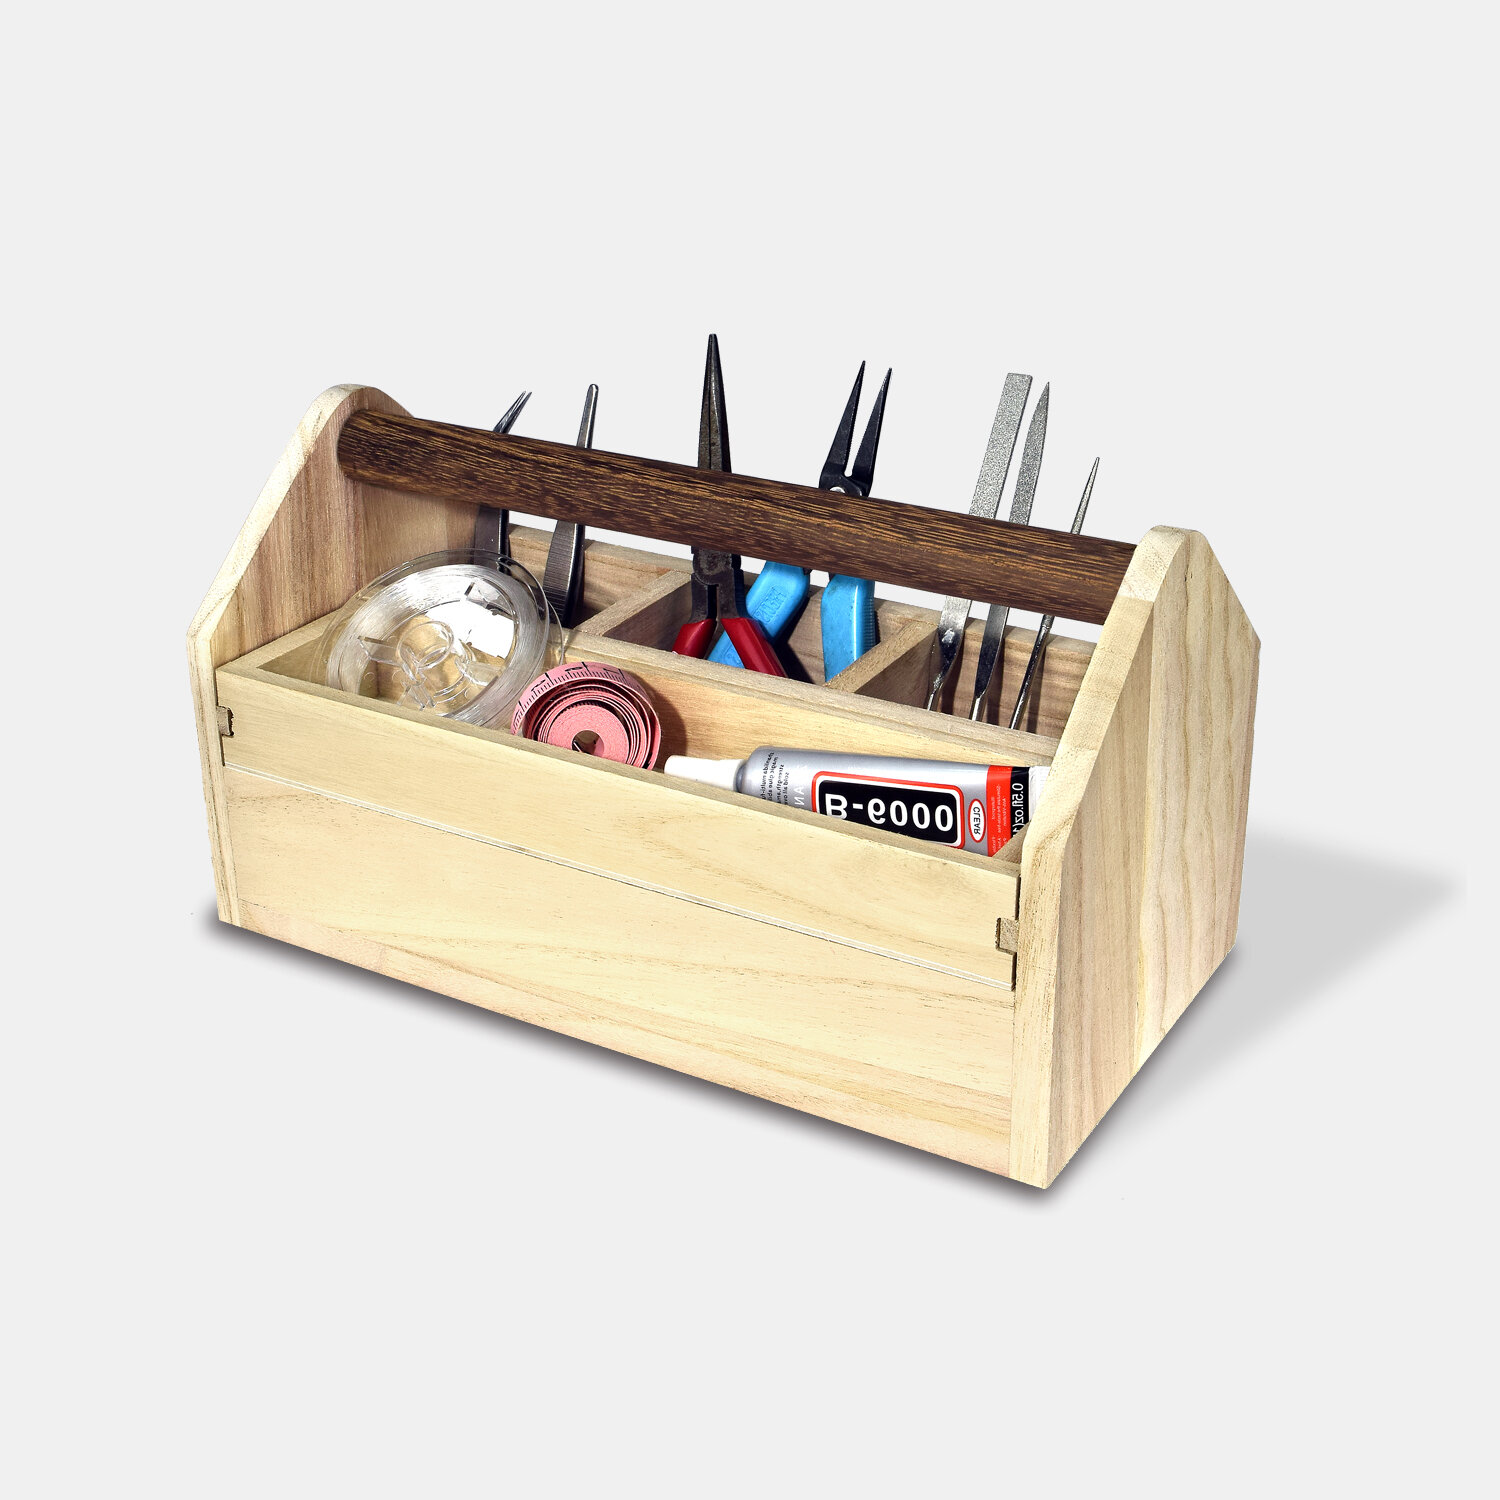 WFX Utility™ Achillea 10.5 Wooden Craft Tool Box Caddy & Reviews